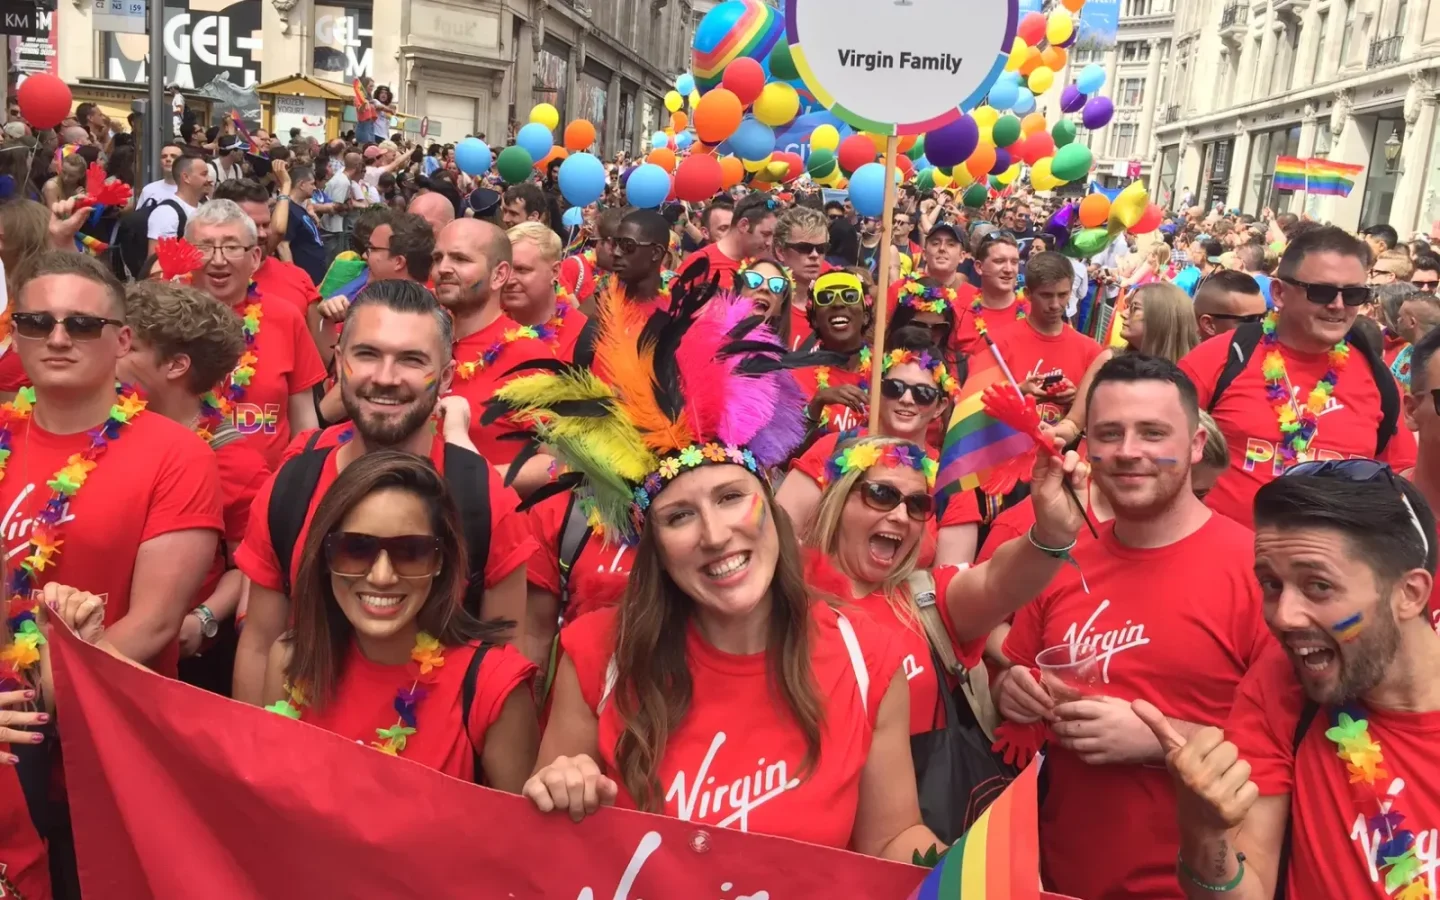 A group of people wearing red tshirts with the Virgin logo on them during the Pride parade. There are lots of rainbow flags and balloons around them